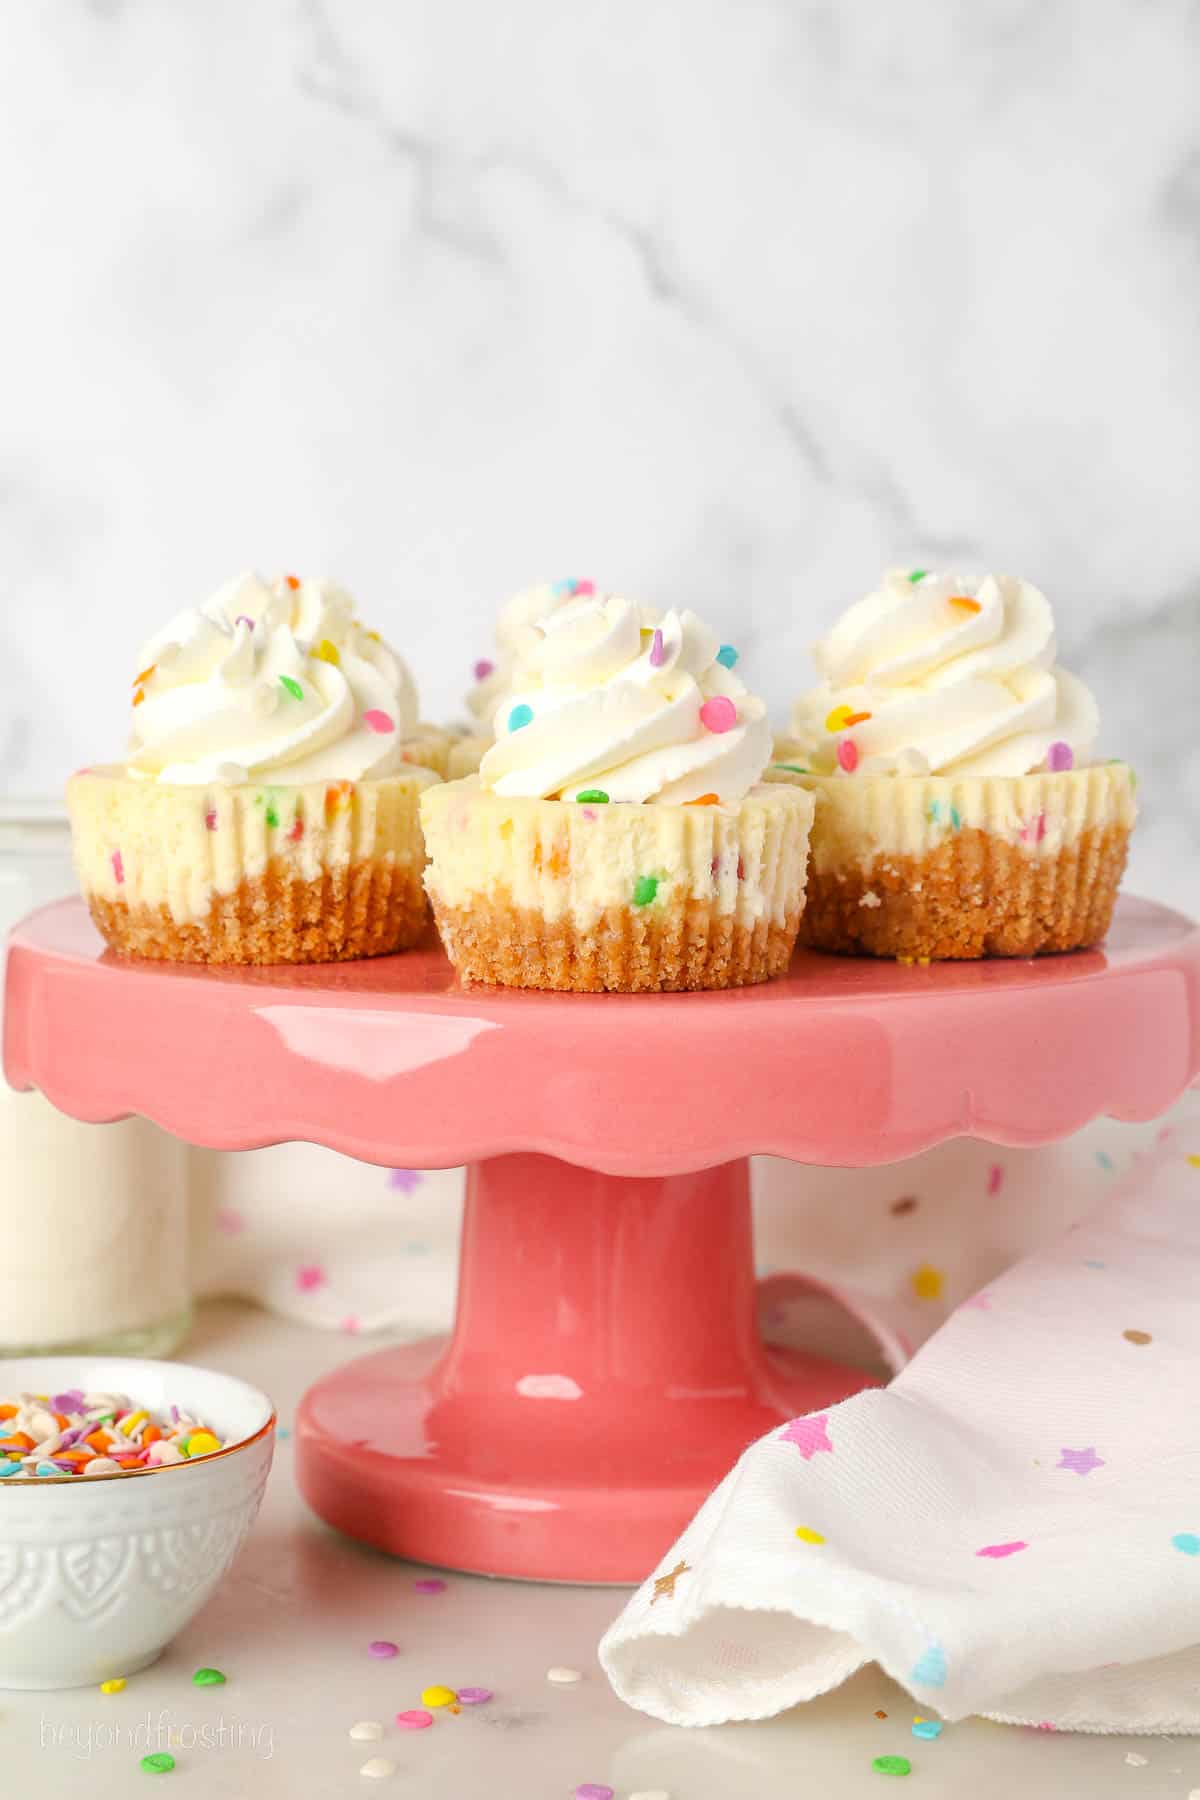 Mini funfetti cheescakes on a pink cake stand, next to a white dishcloth and a bowl of sprinkles.